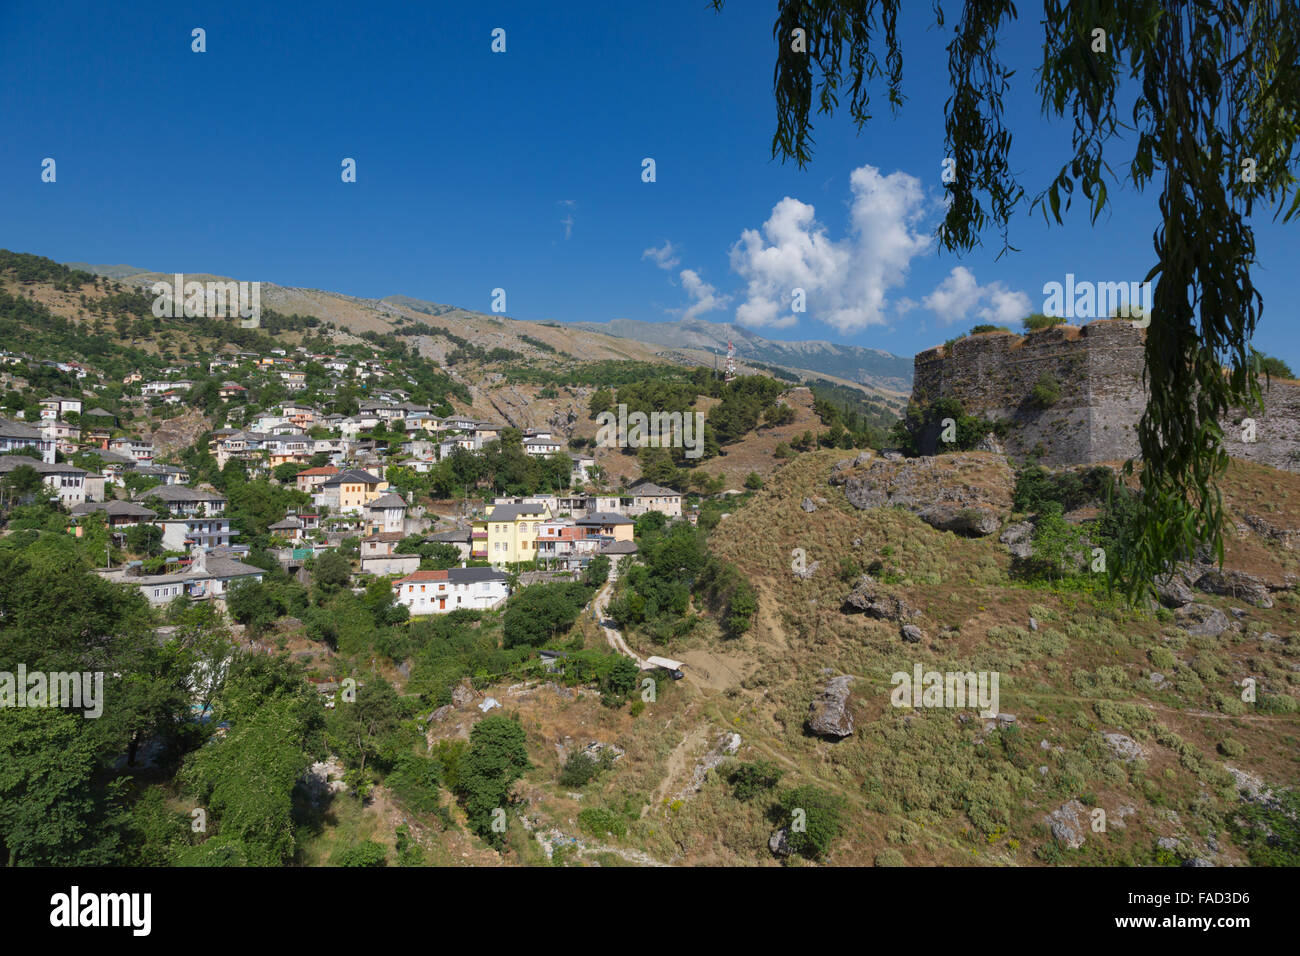 Gjirokastra or Gjirokaster, Albania. The Castle or Citadel with a suburb of the town to the left. Stock Photo